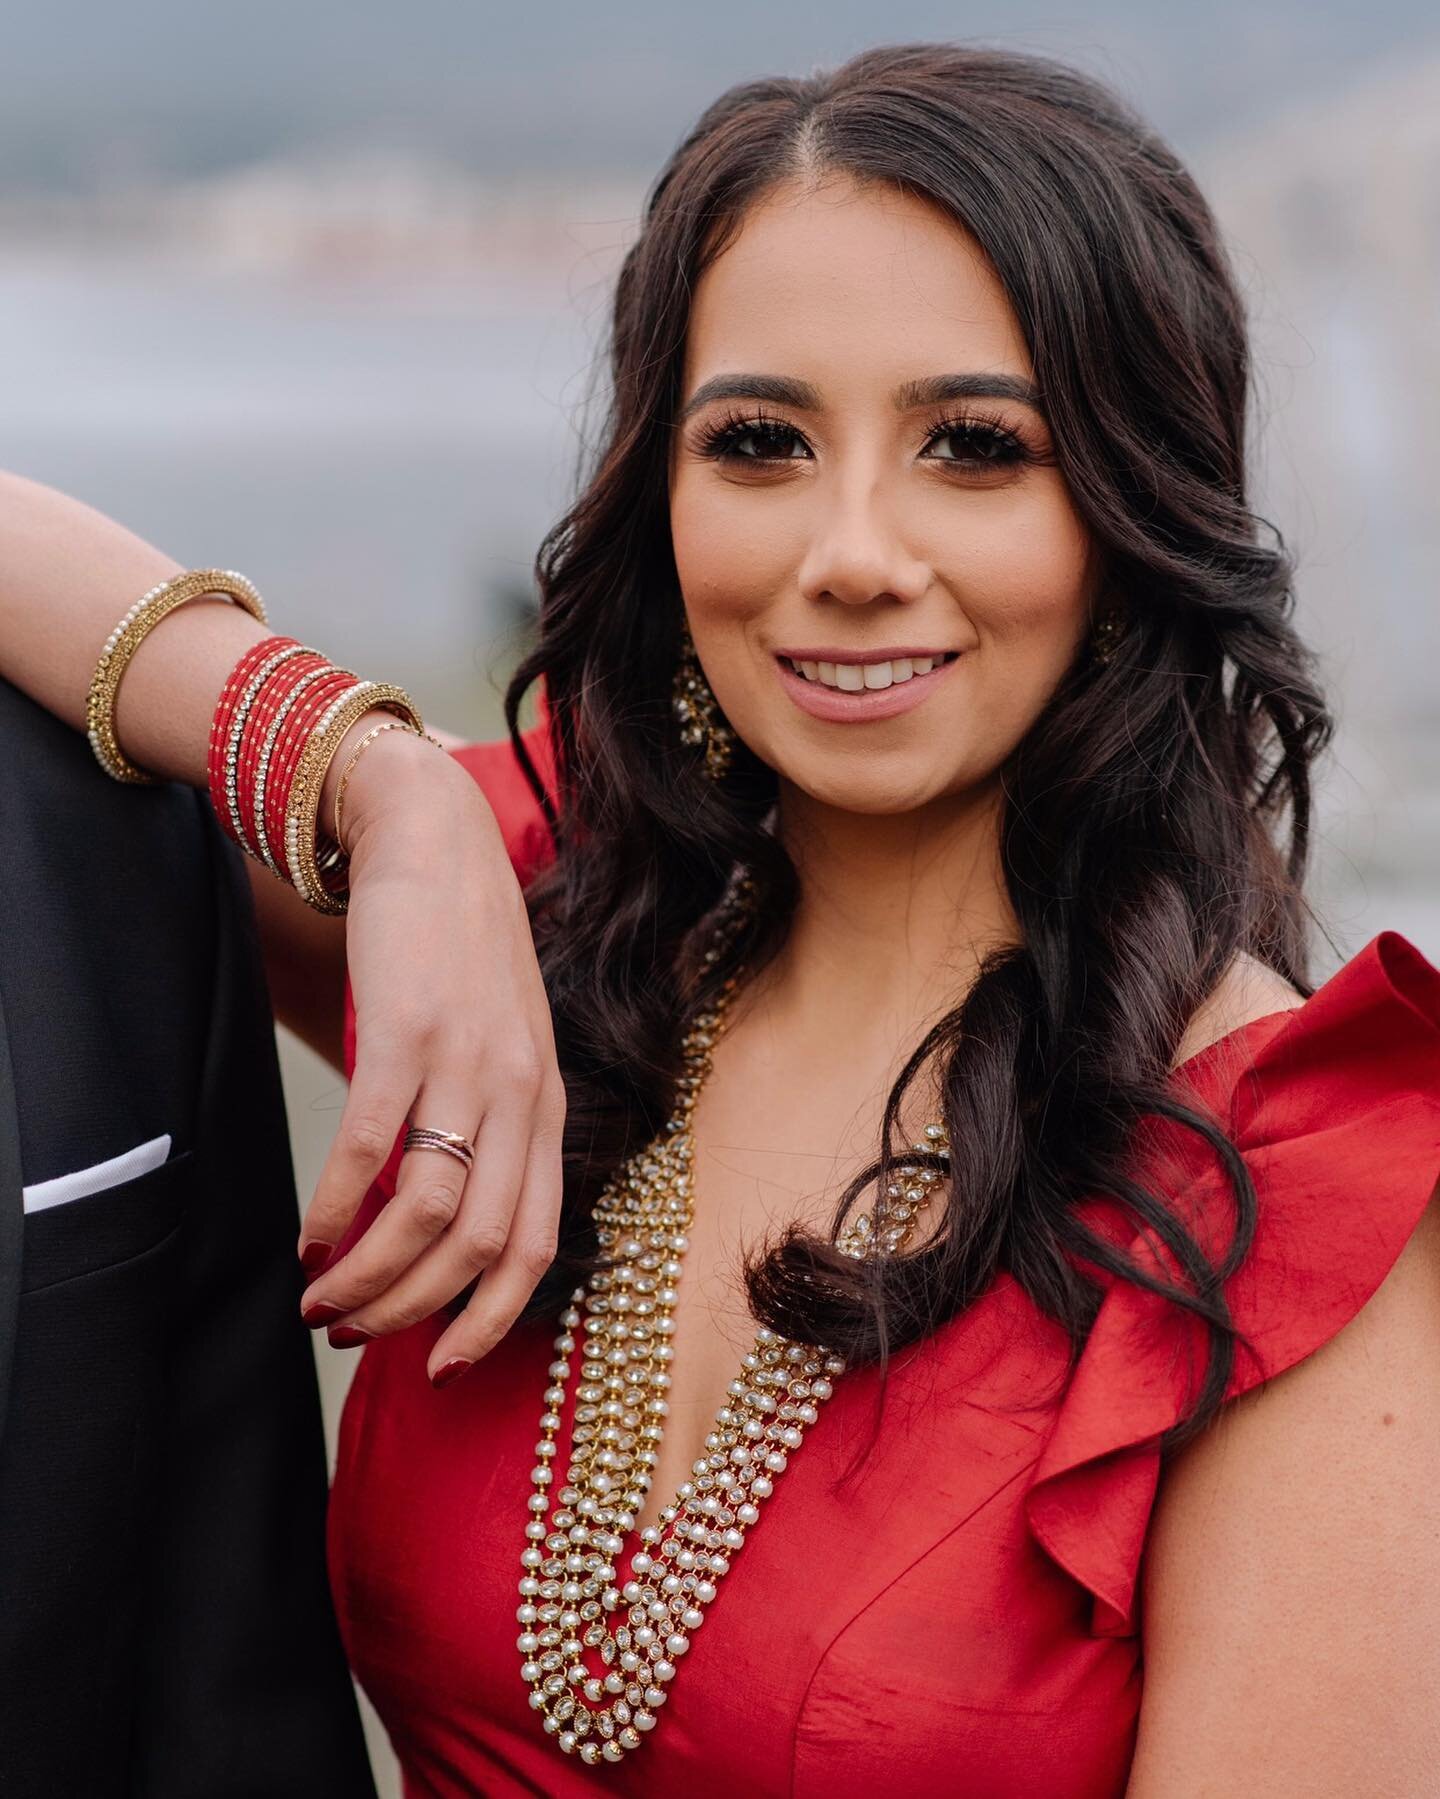 &ldquo;A smile is the prettiest thing you can wear&rdquo; &hearts;️ 

Makeup and hair: @nalinimaharaj 
Photography: @mathiasfast 

✨For bookings and inquiries please email info@nalinimaharaj.com or text 604-727-0285 ✨⠀⠀⠀⠀

#bride #bridalmakeup #brida